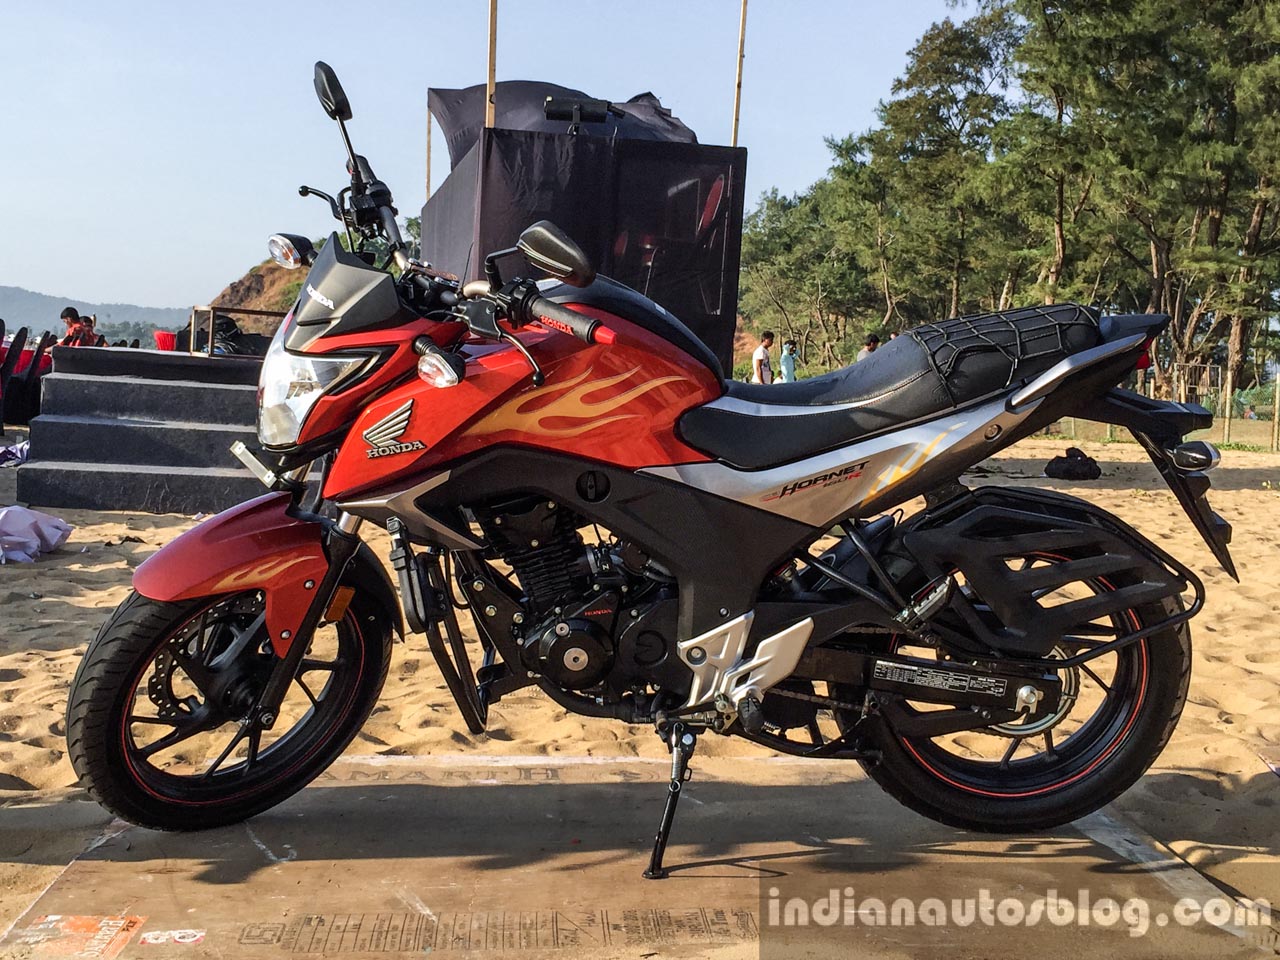 Honda Cb Hornet 160r Faired Variant Slated To Launch This Fiscal